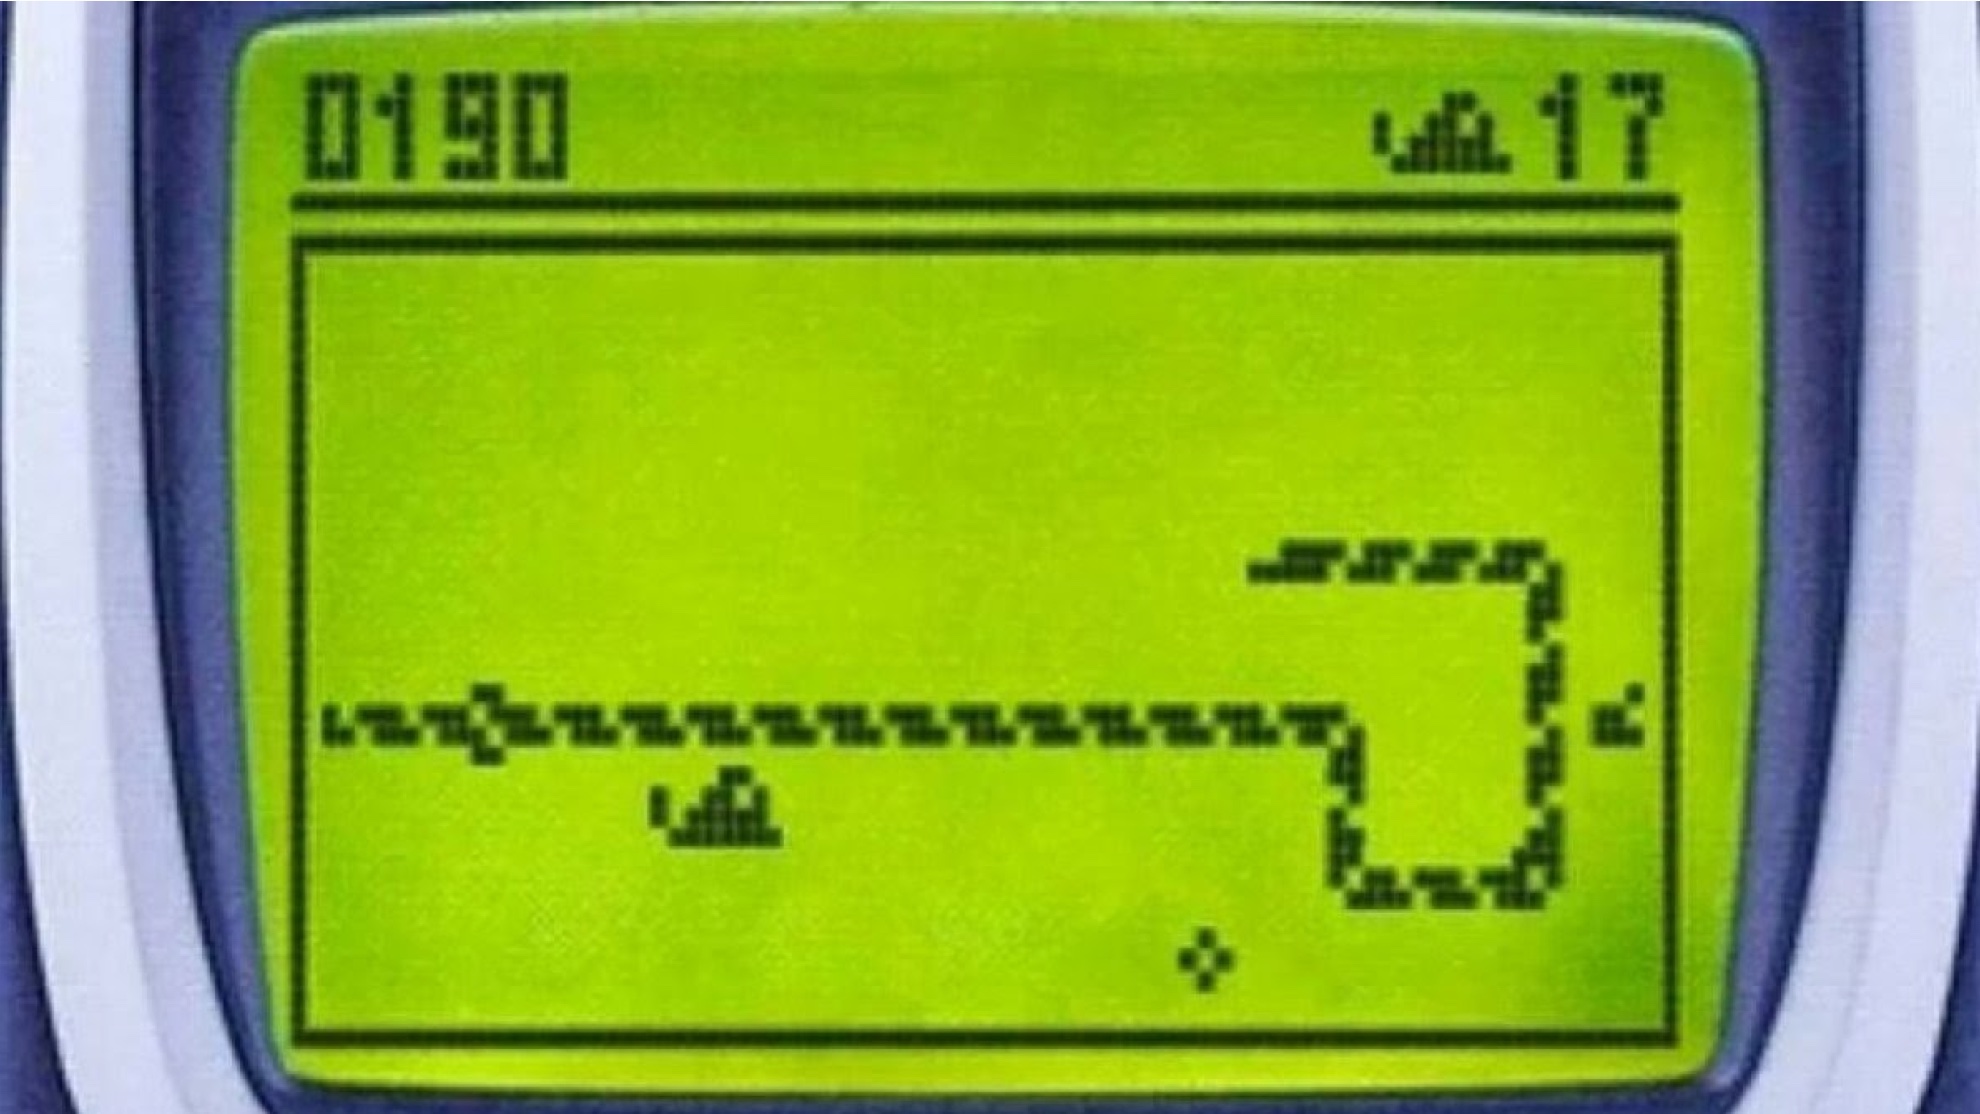 This smartphone app lets you play Snake like you're on an old